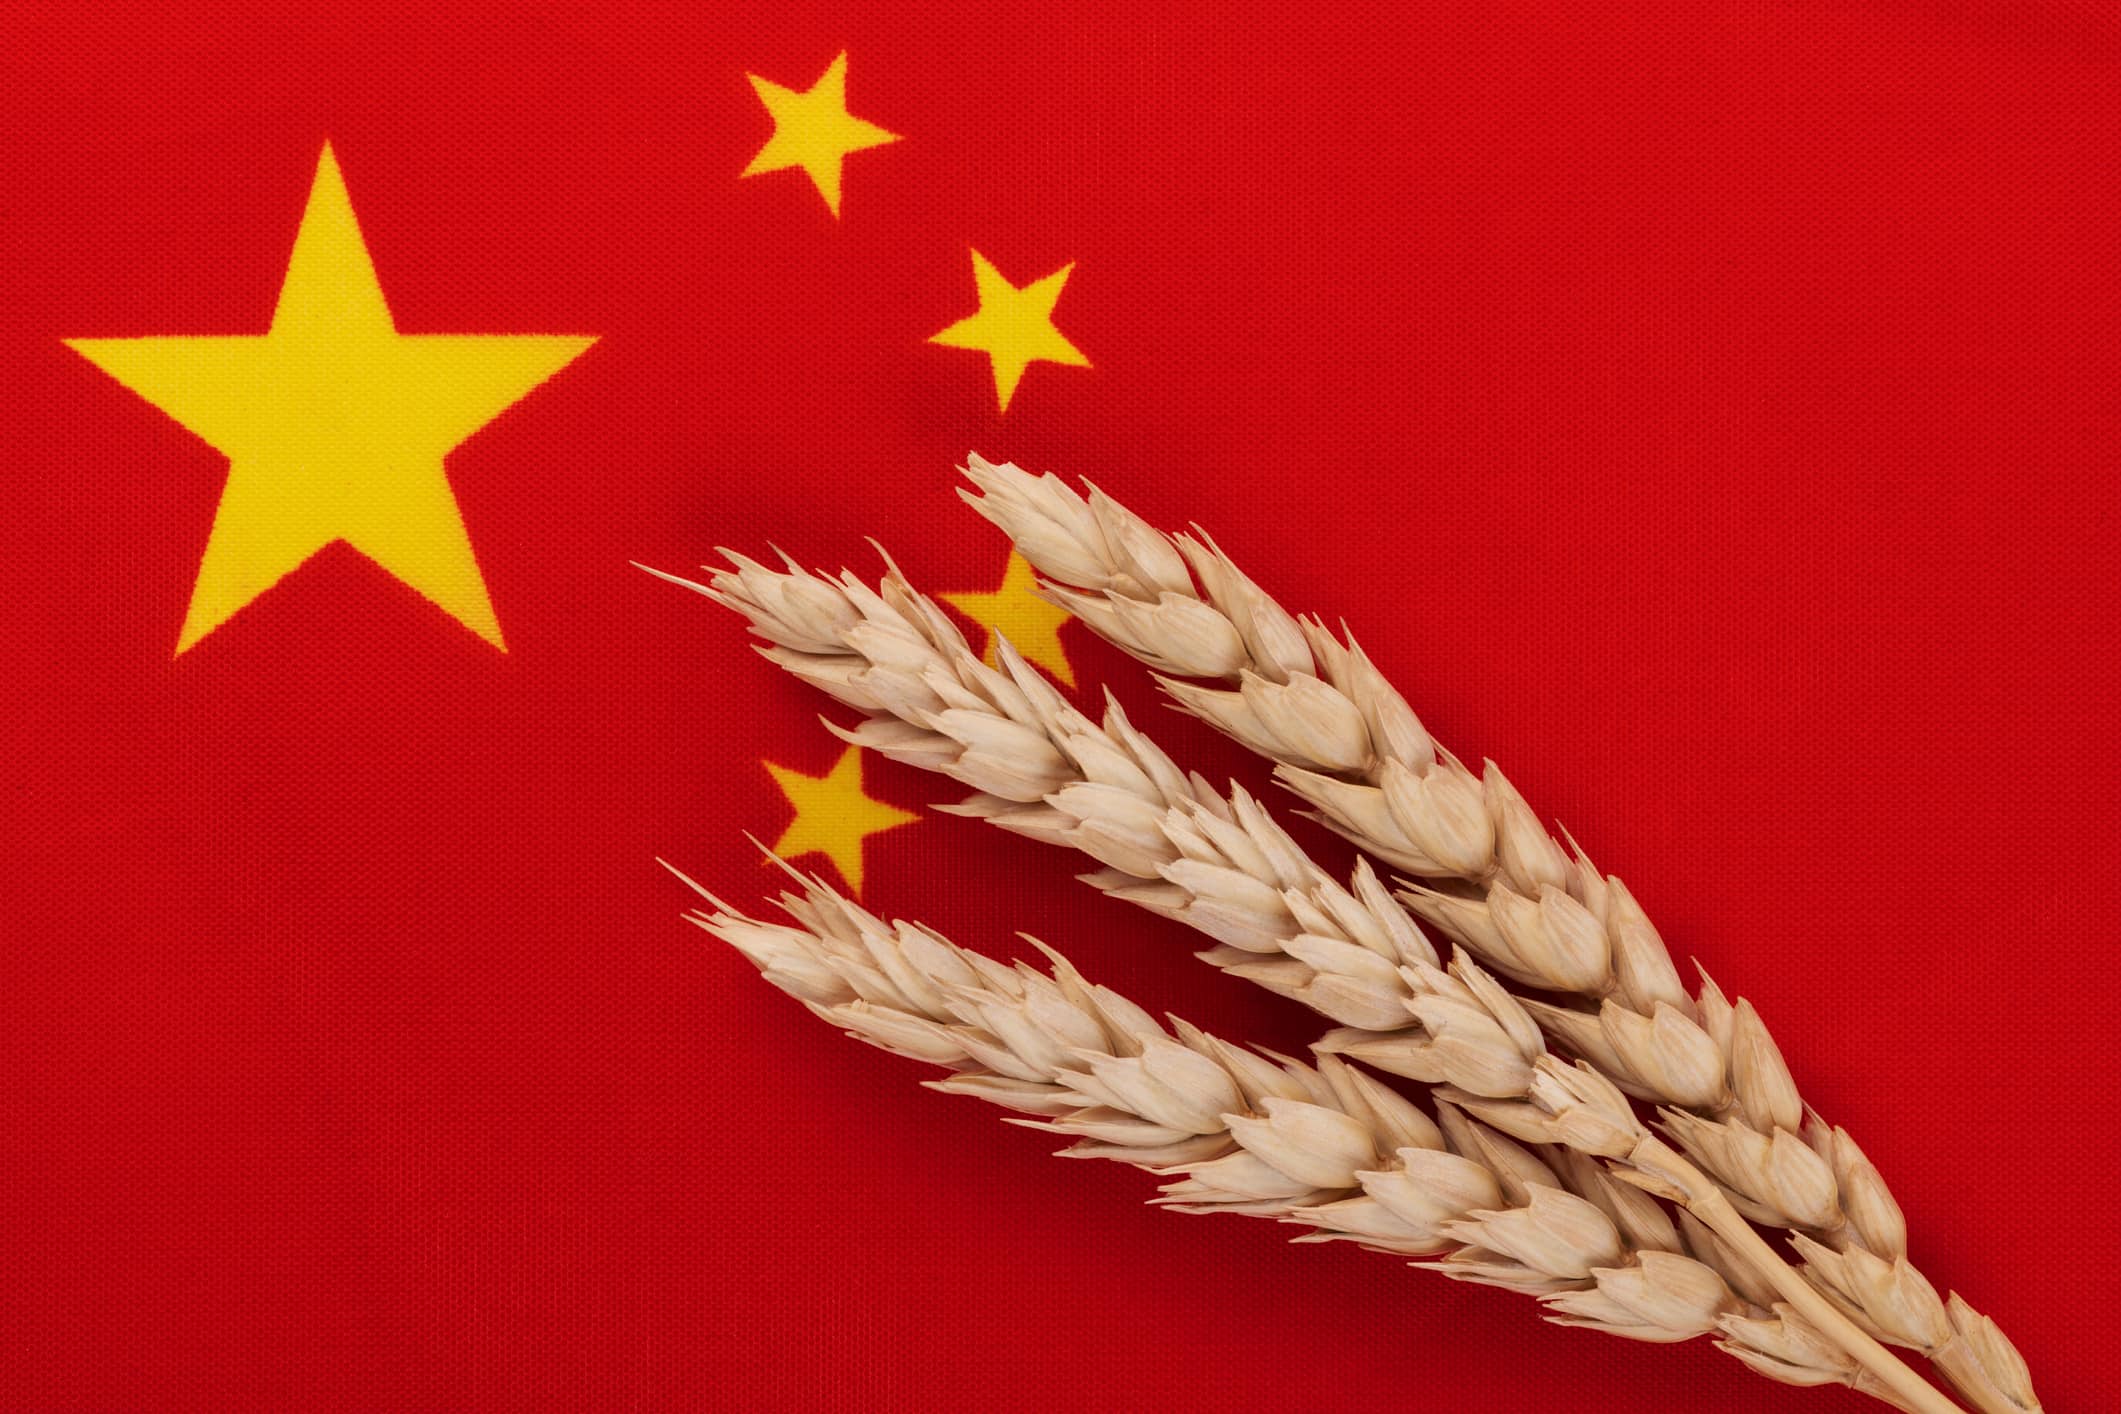 Three ripe ears of wheat against the background of a fragment of the flag of China